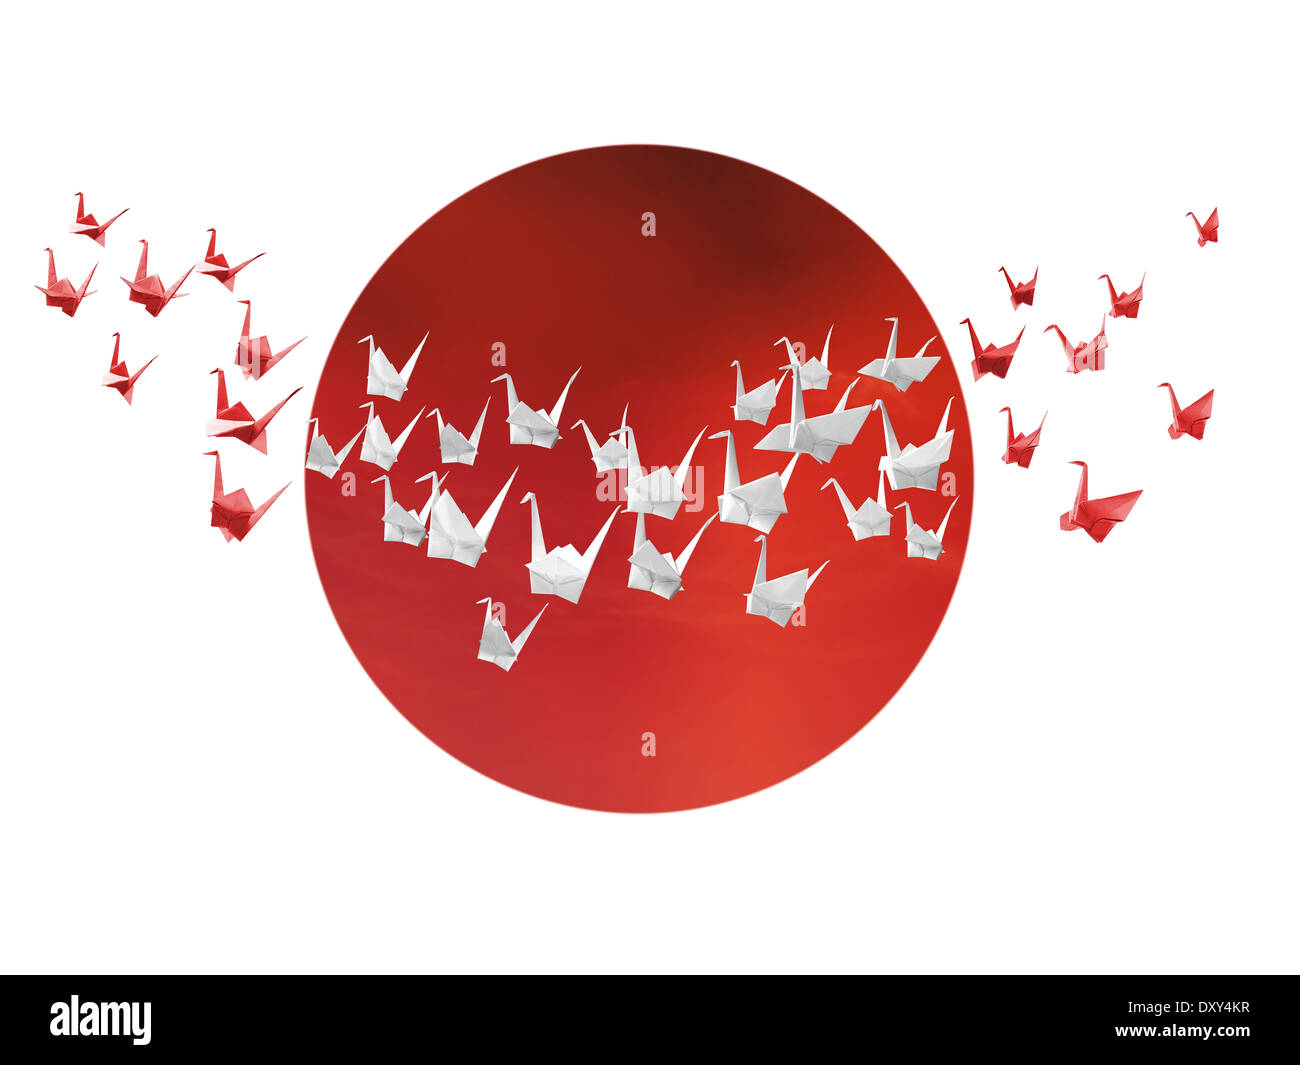 Traditional Japanese white and red origami cranes flying over stylized Japanese flag Stock Photo